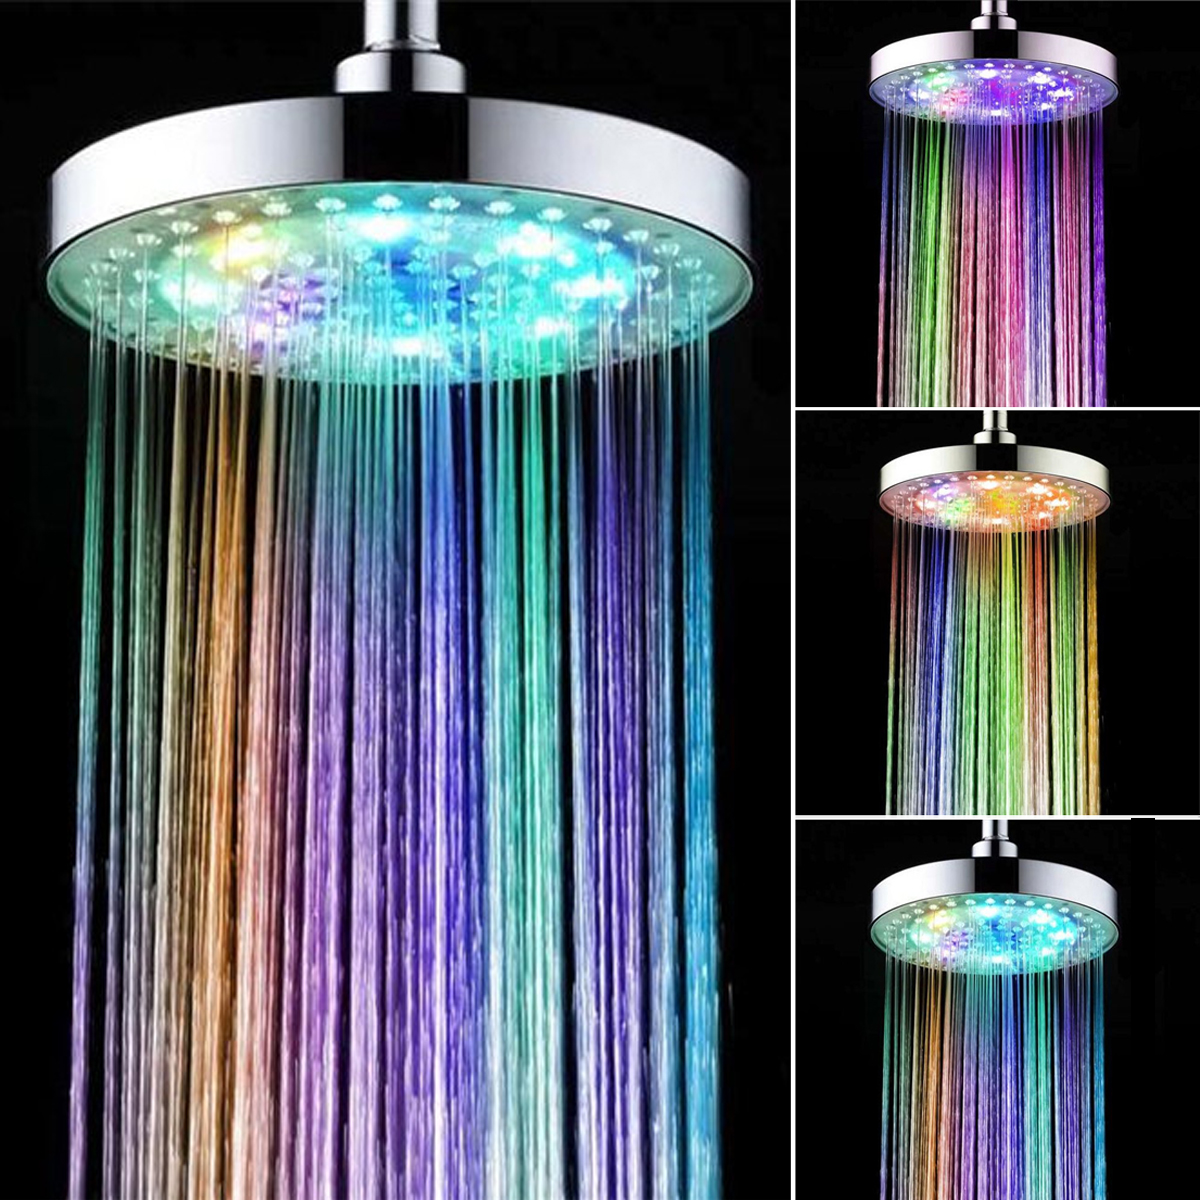 

8 Inch 7 Colors Automatic Changing Round Top LED Light Shower Head Bathroom